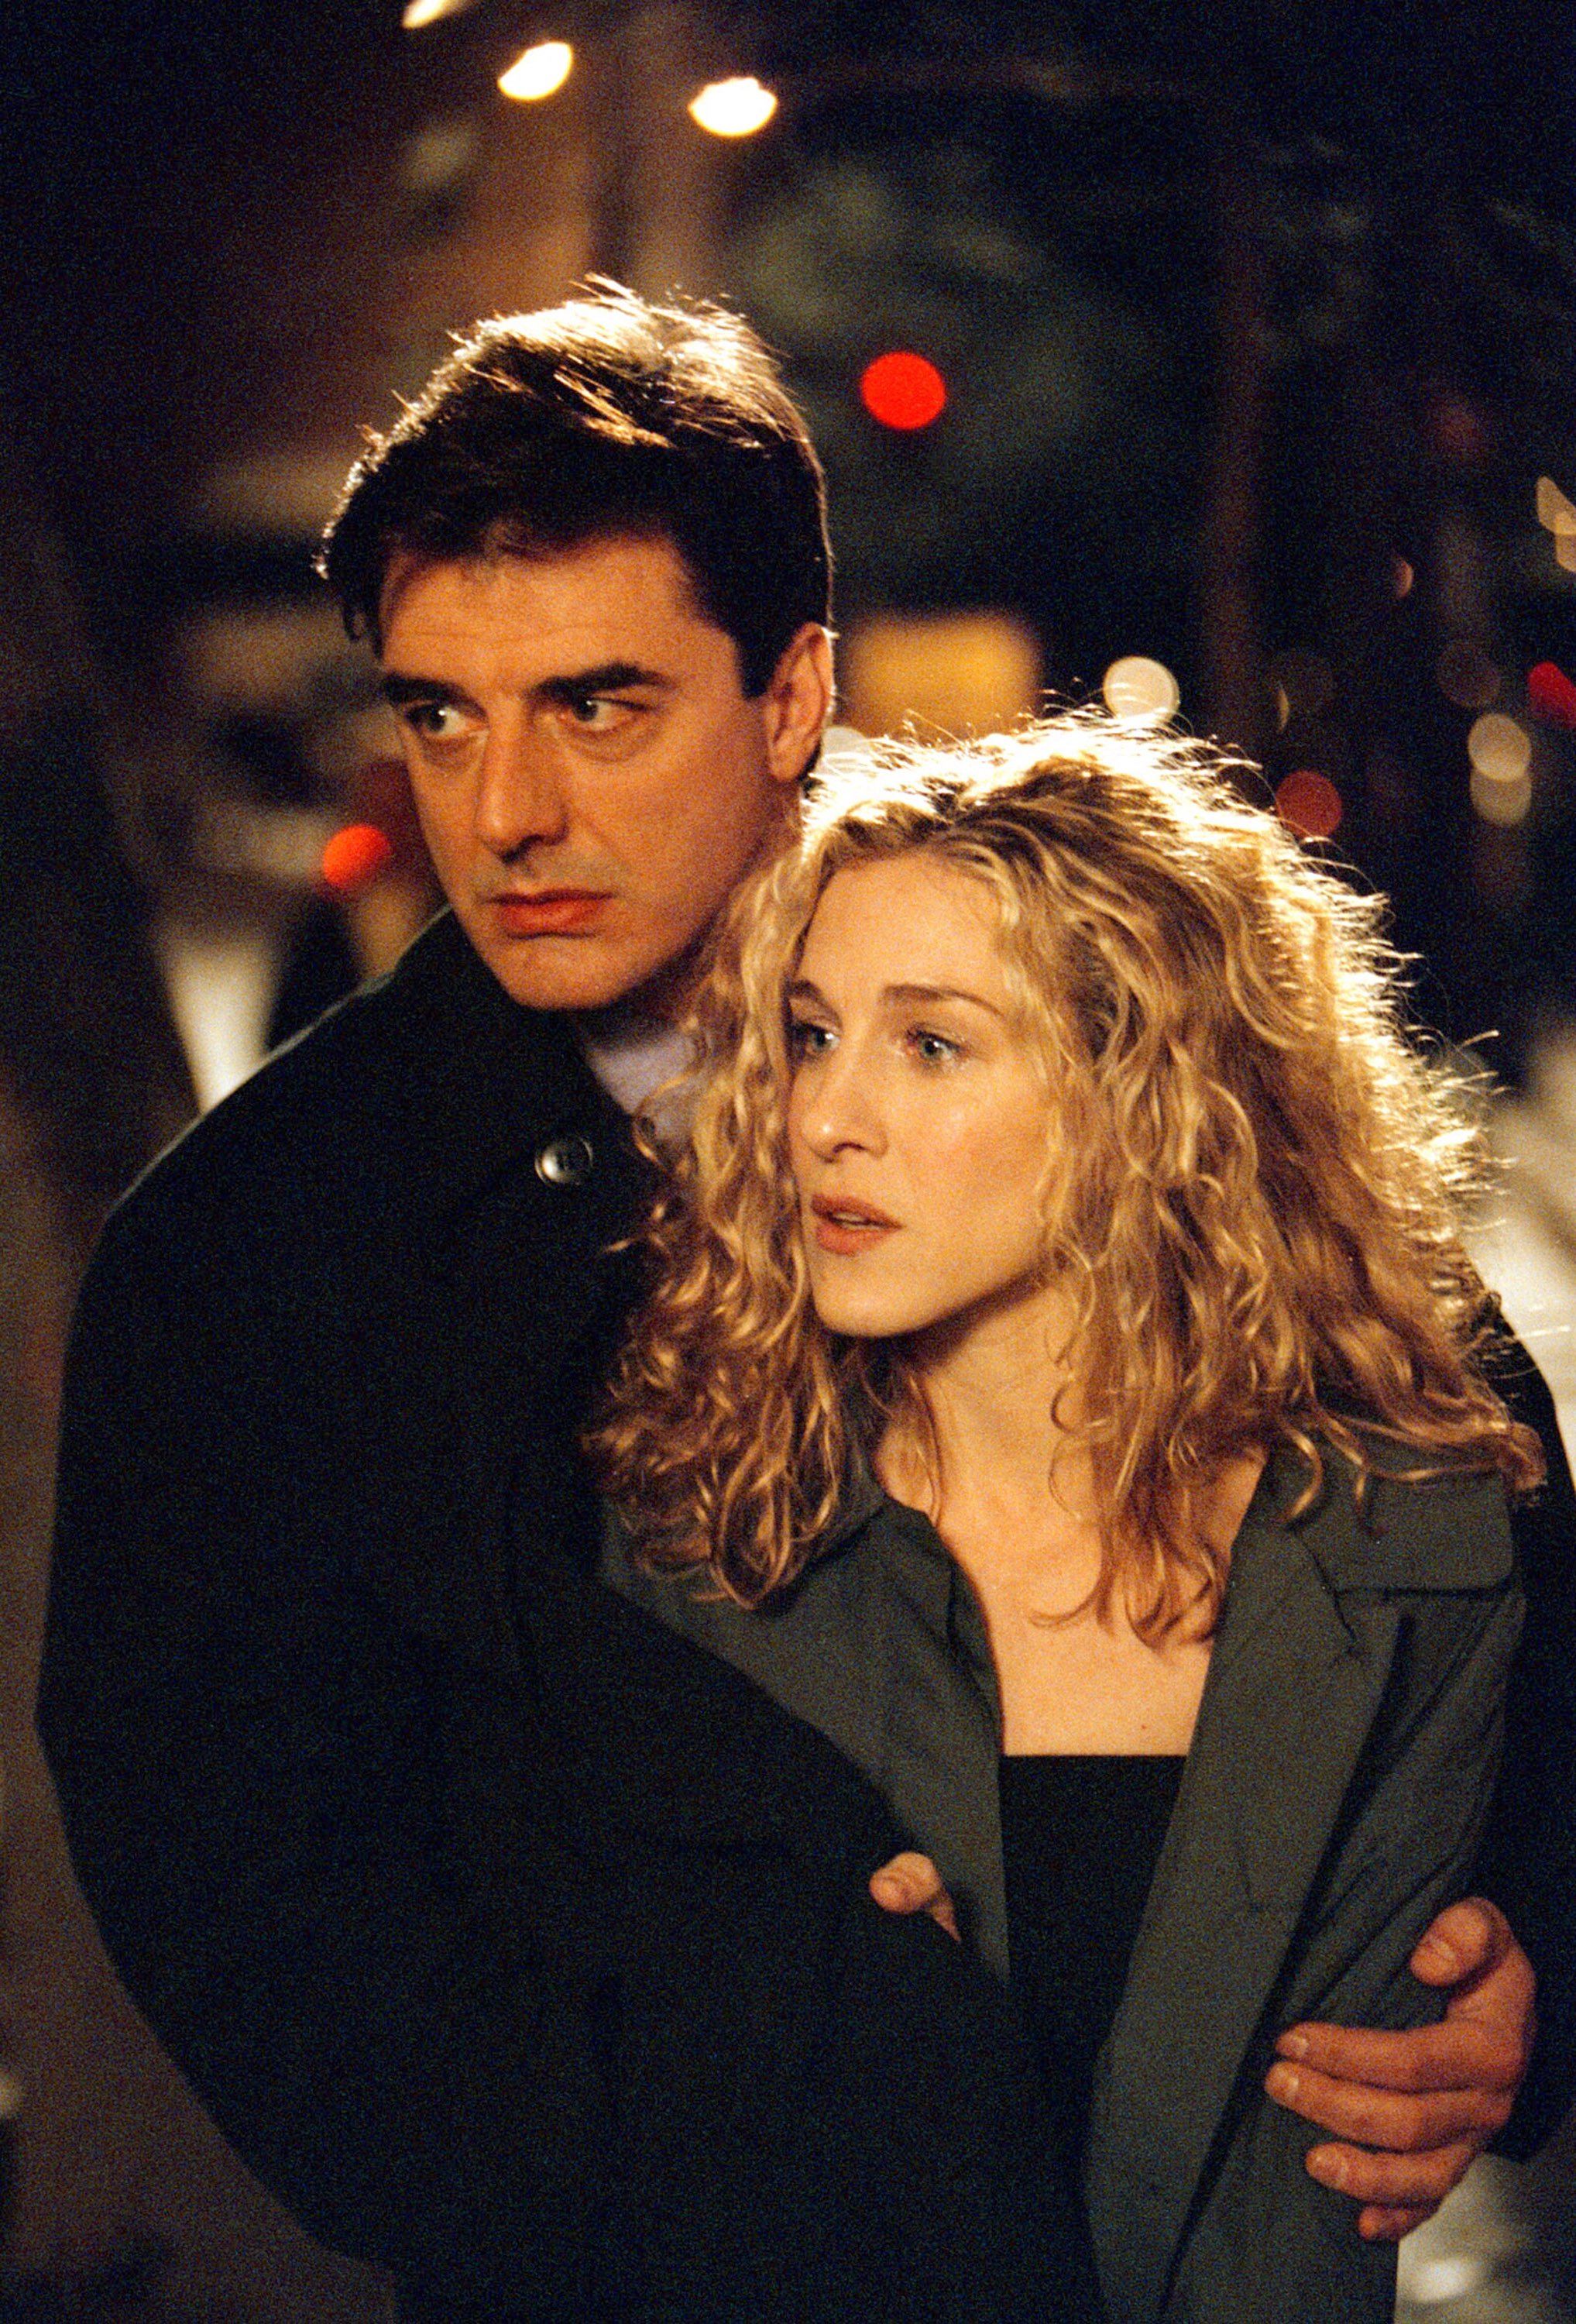 Chris Noth and Sarah Jessica Parker cuddle on the streets of New York during the filming of 'Sex and the City'